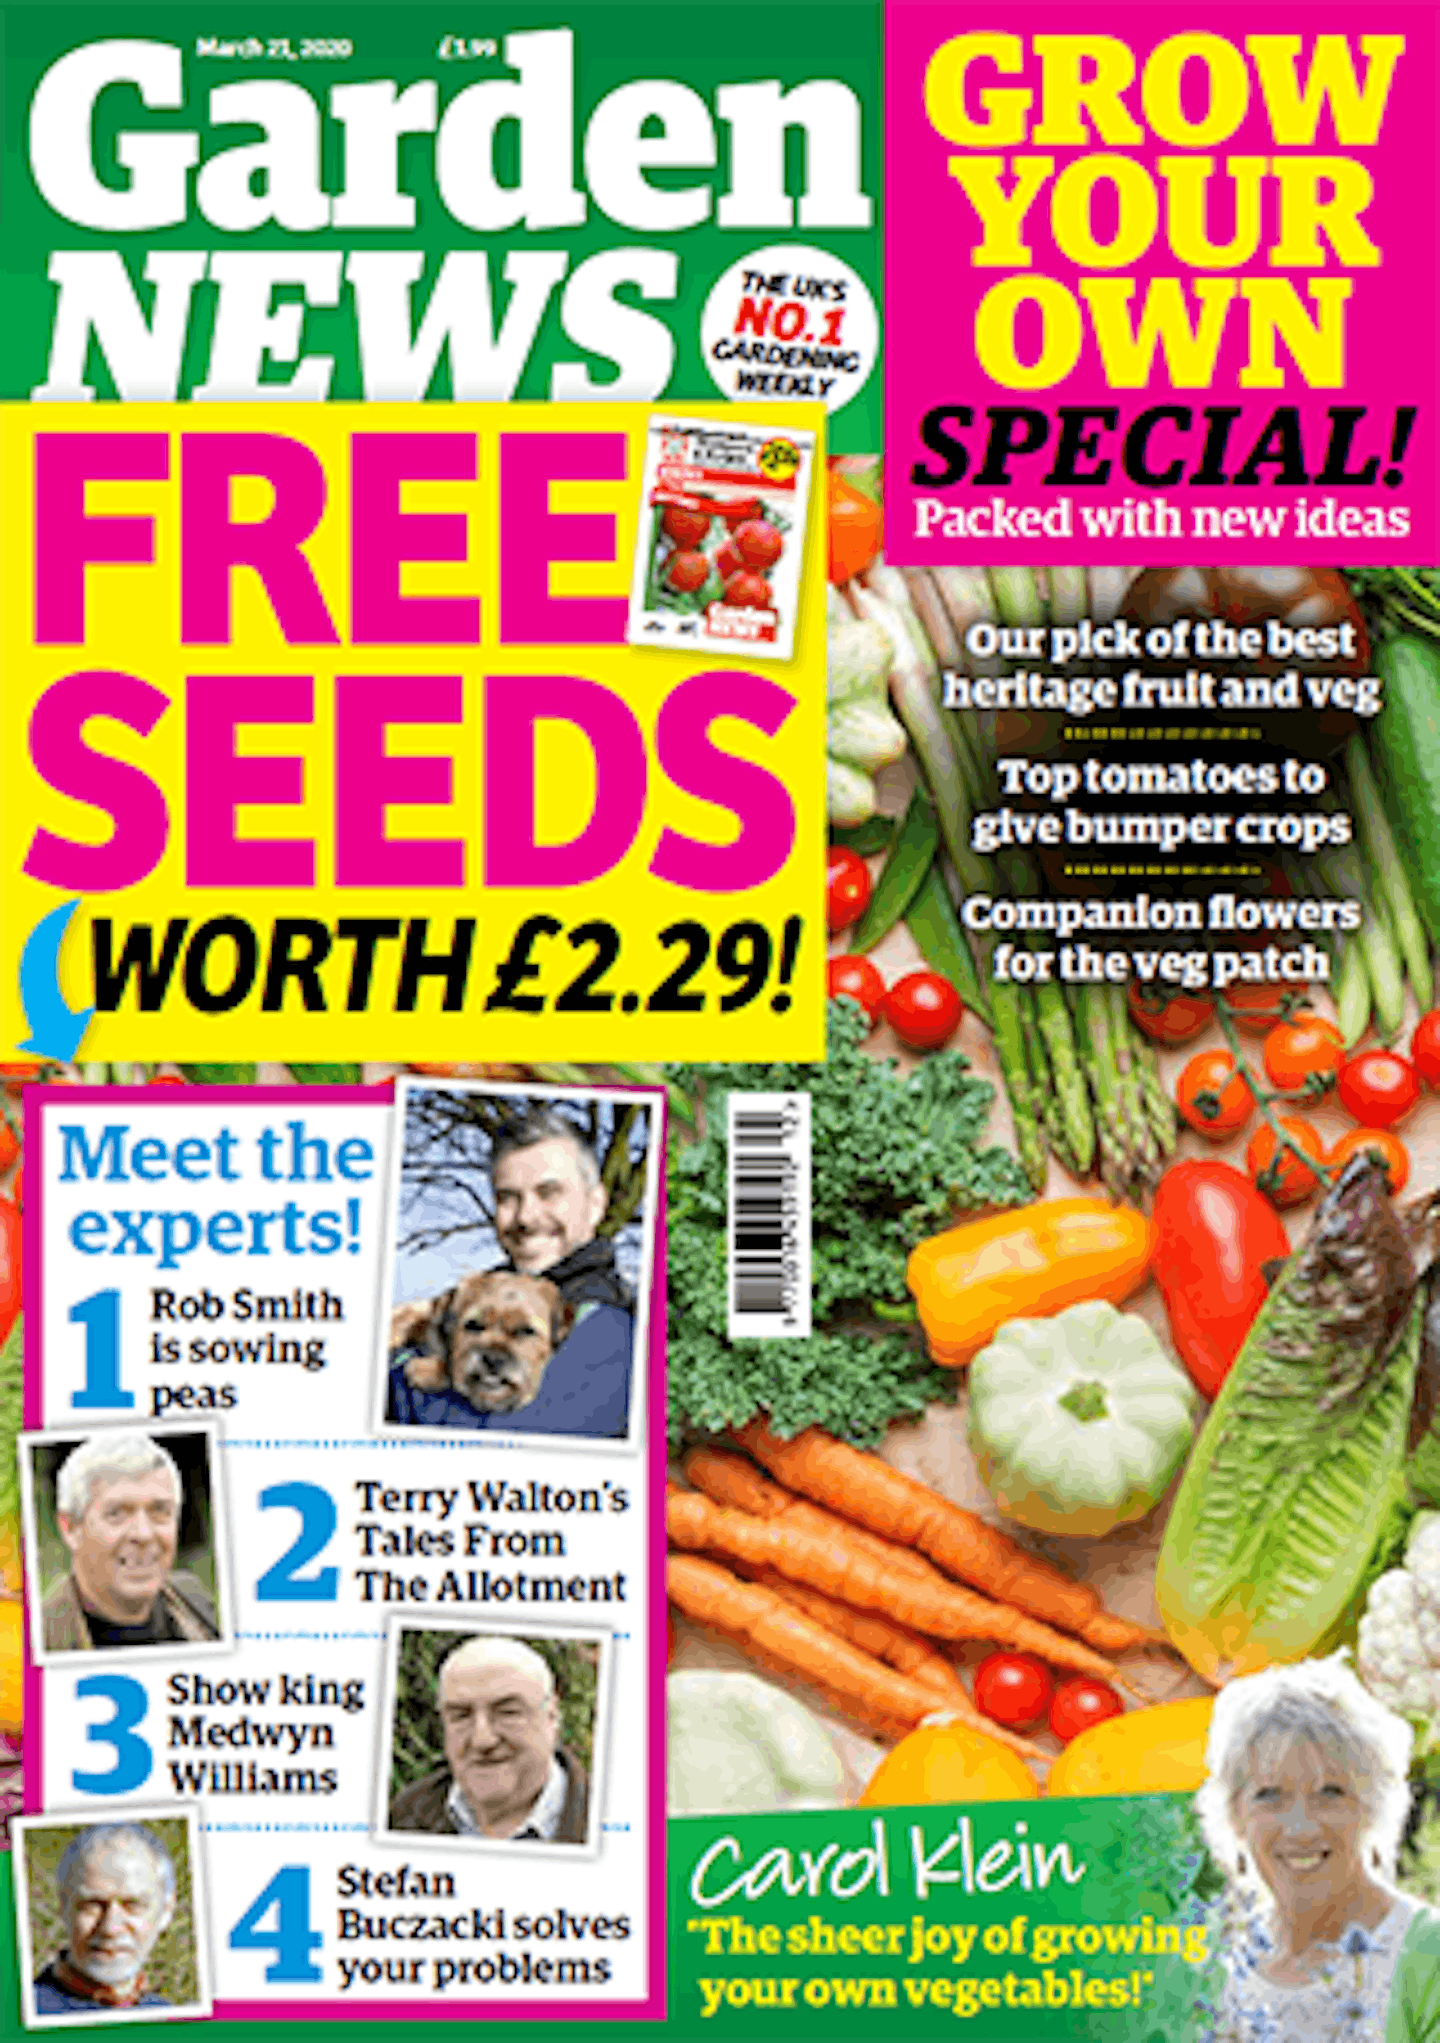 BUY, SUBSCRIBE OR TRY GARDEN NEWS